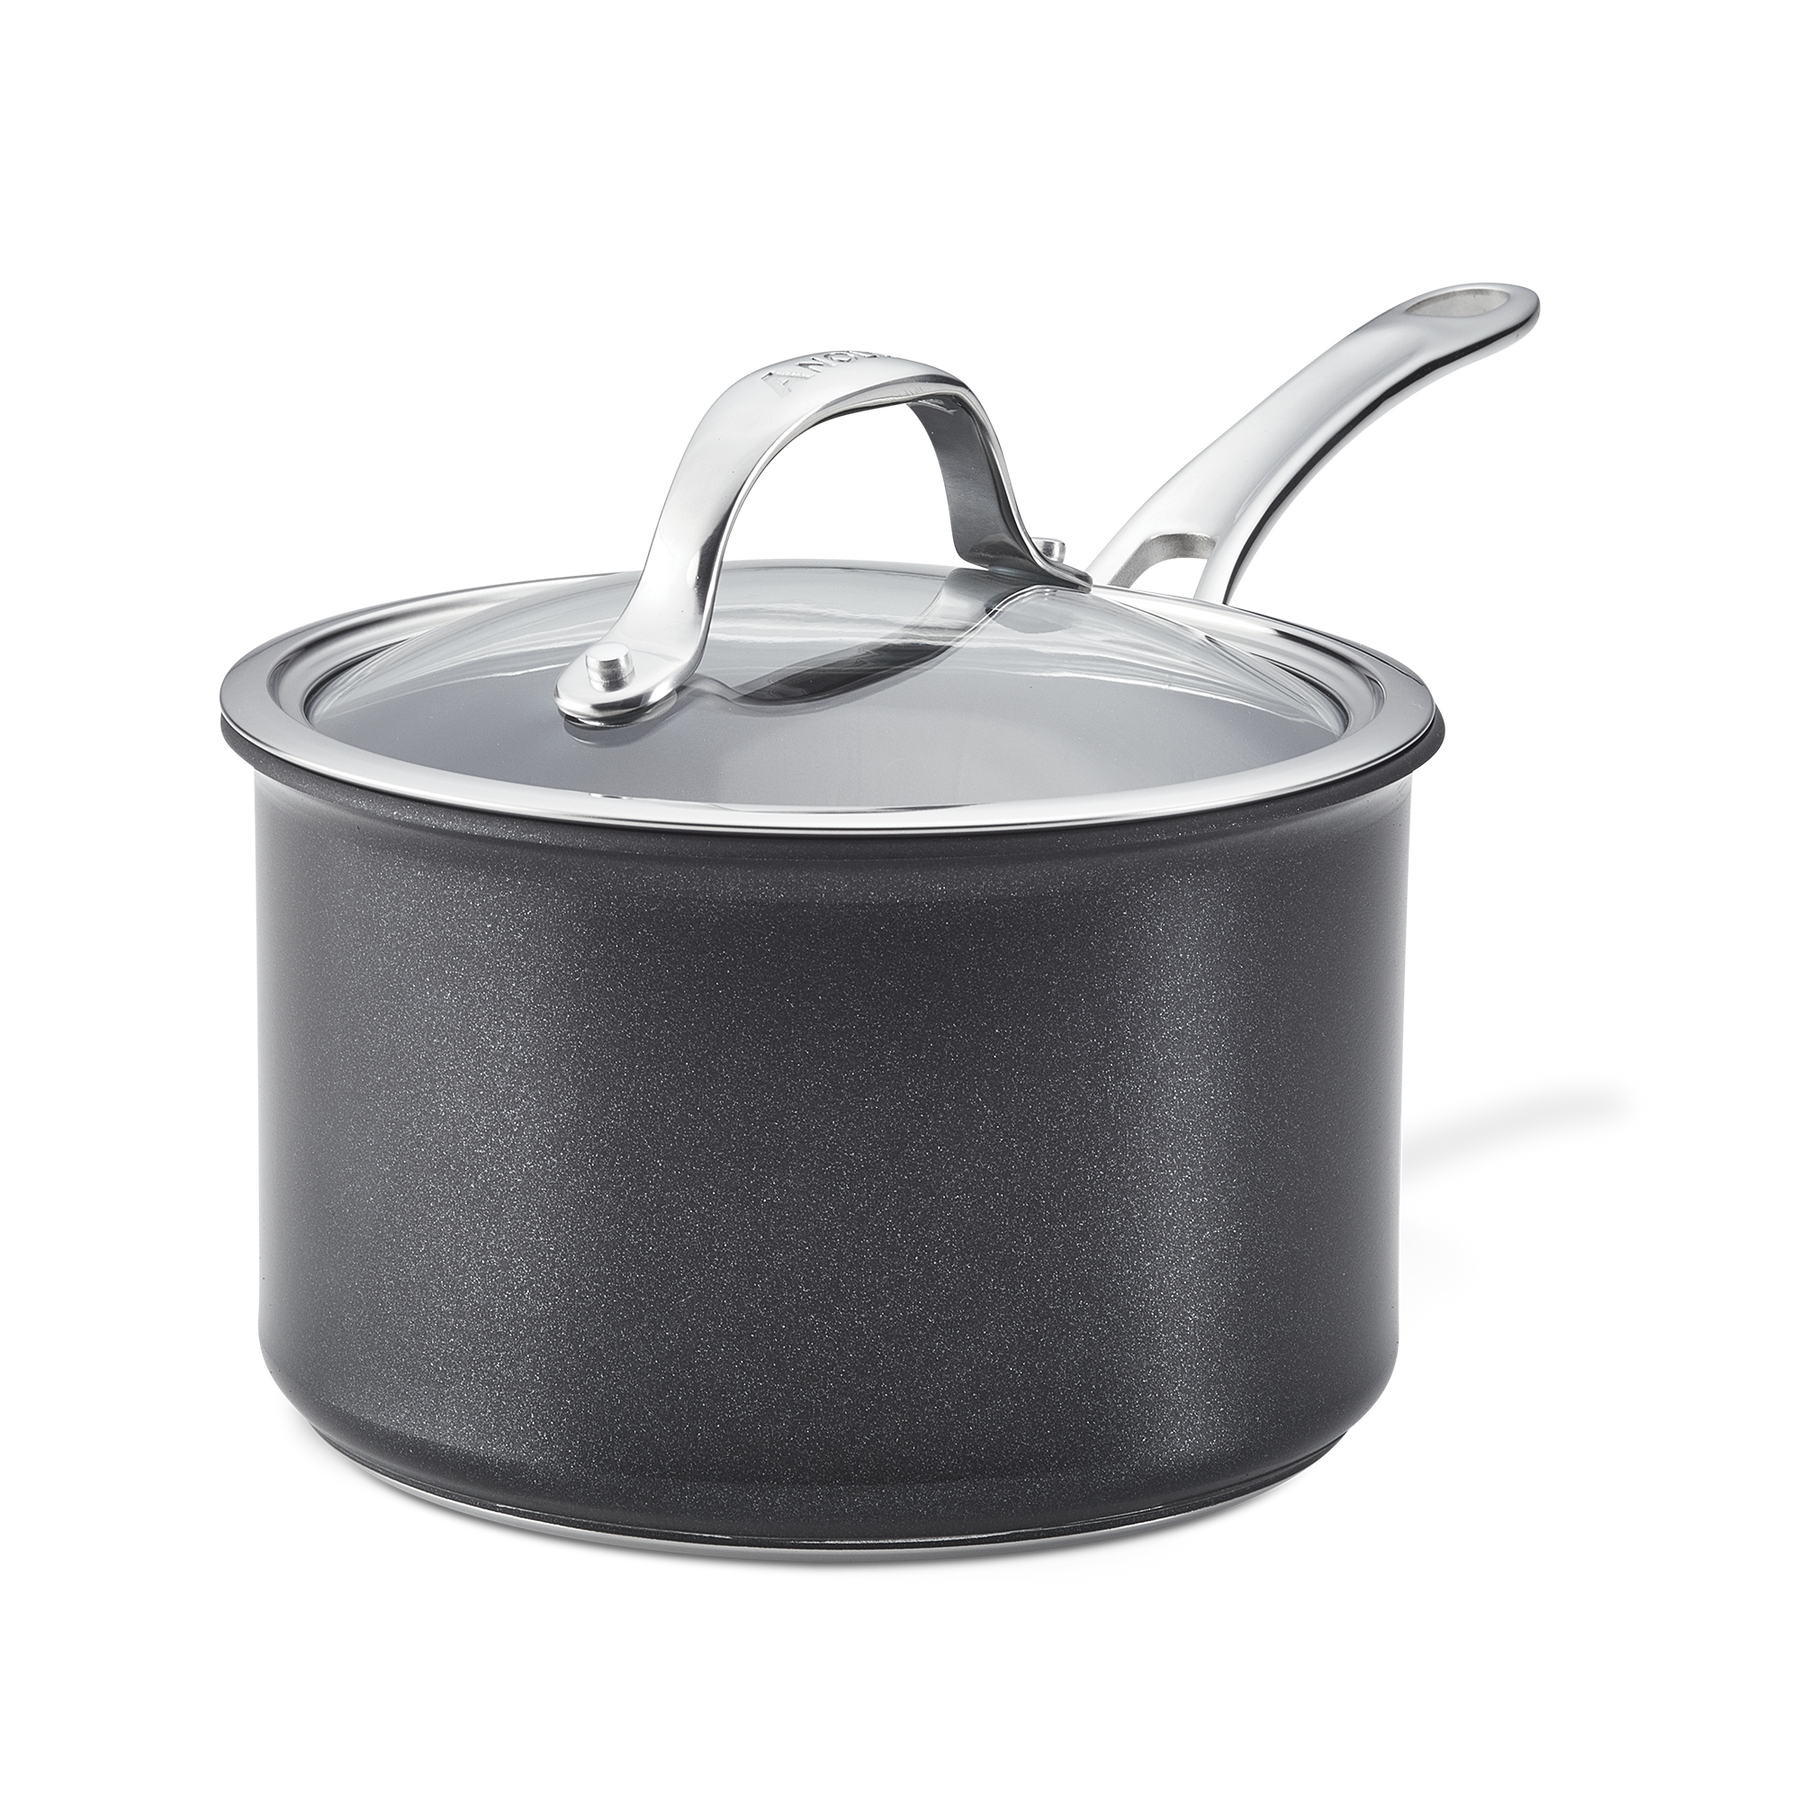 Tri-Ply Stainless Steel 3QT Saucepan Pot with Lid, Professional Cooking,  Multi C